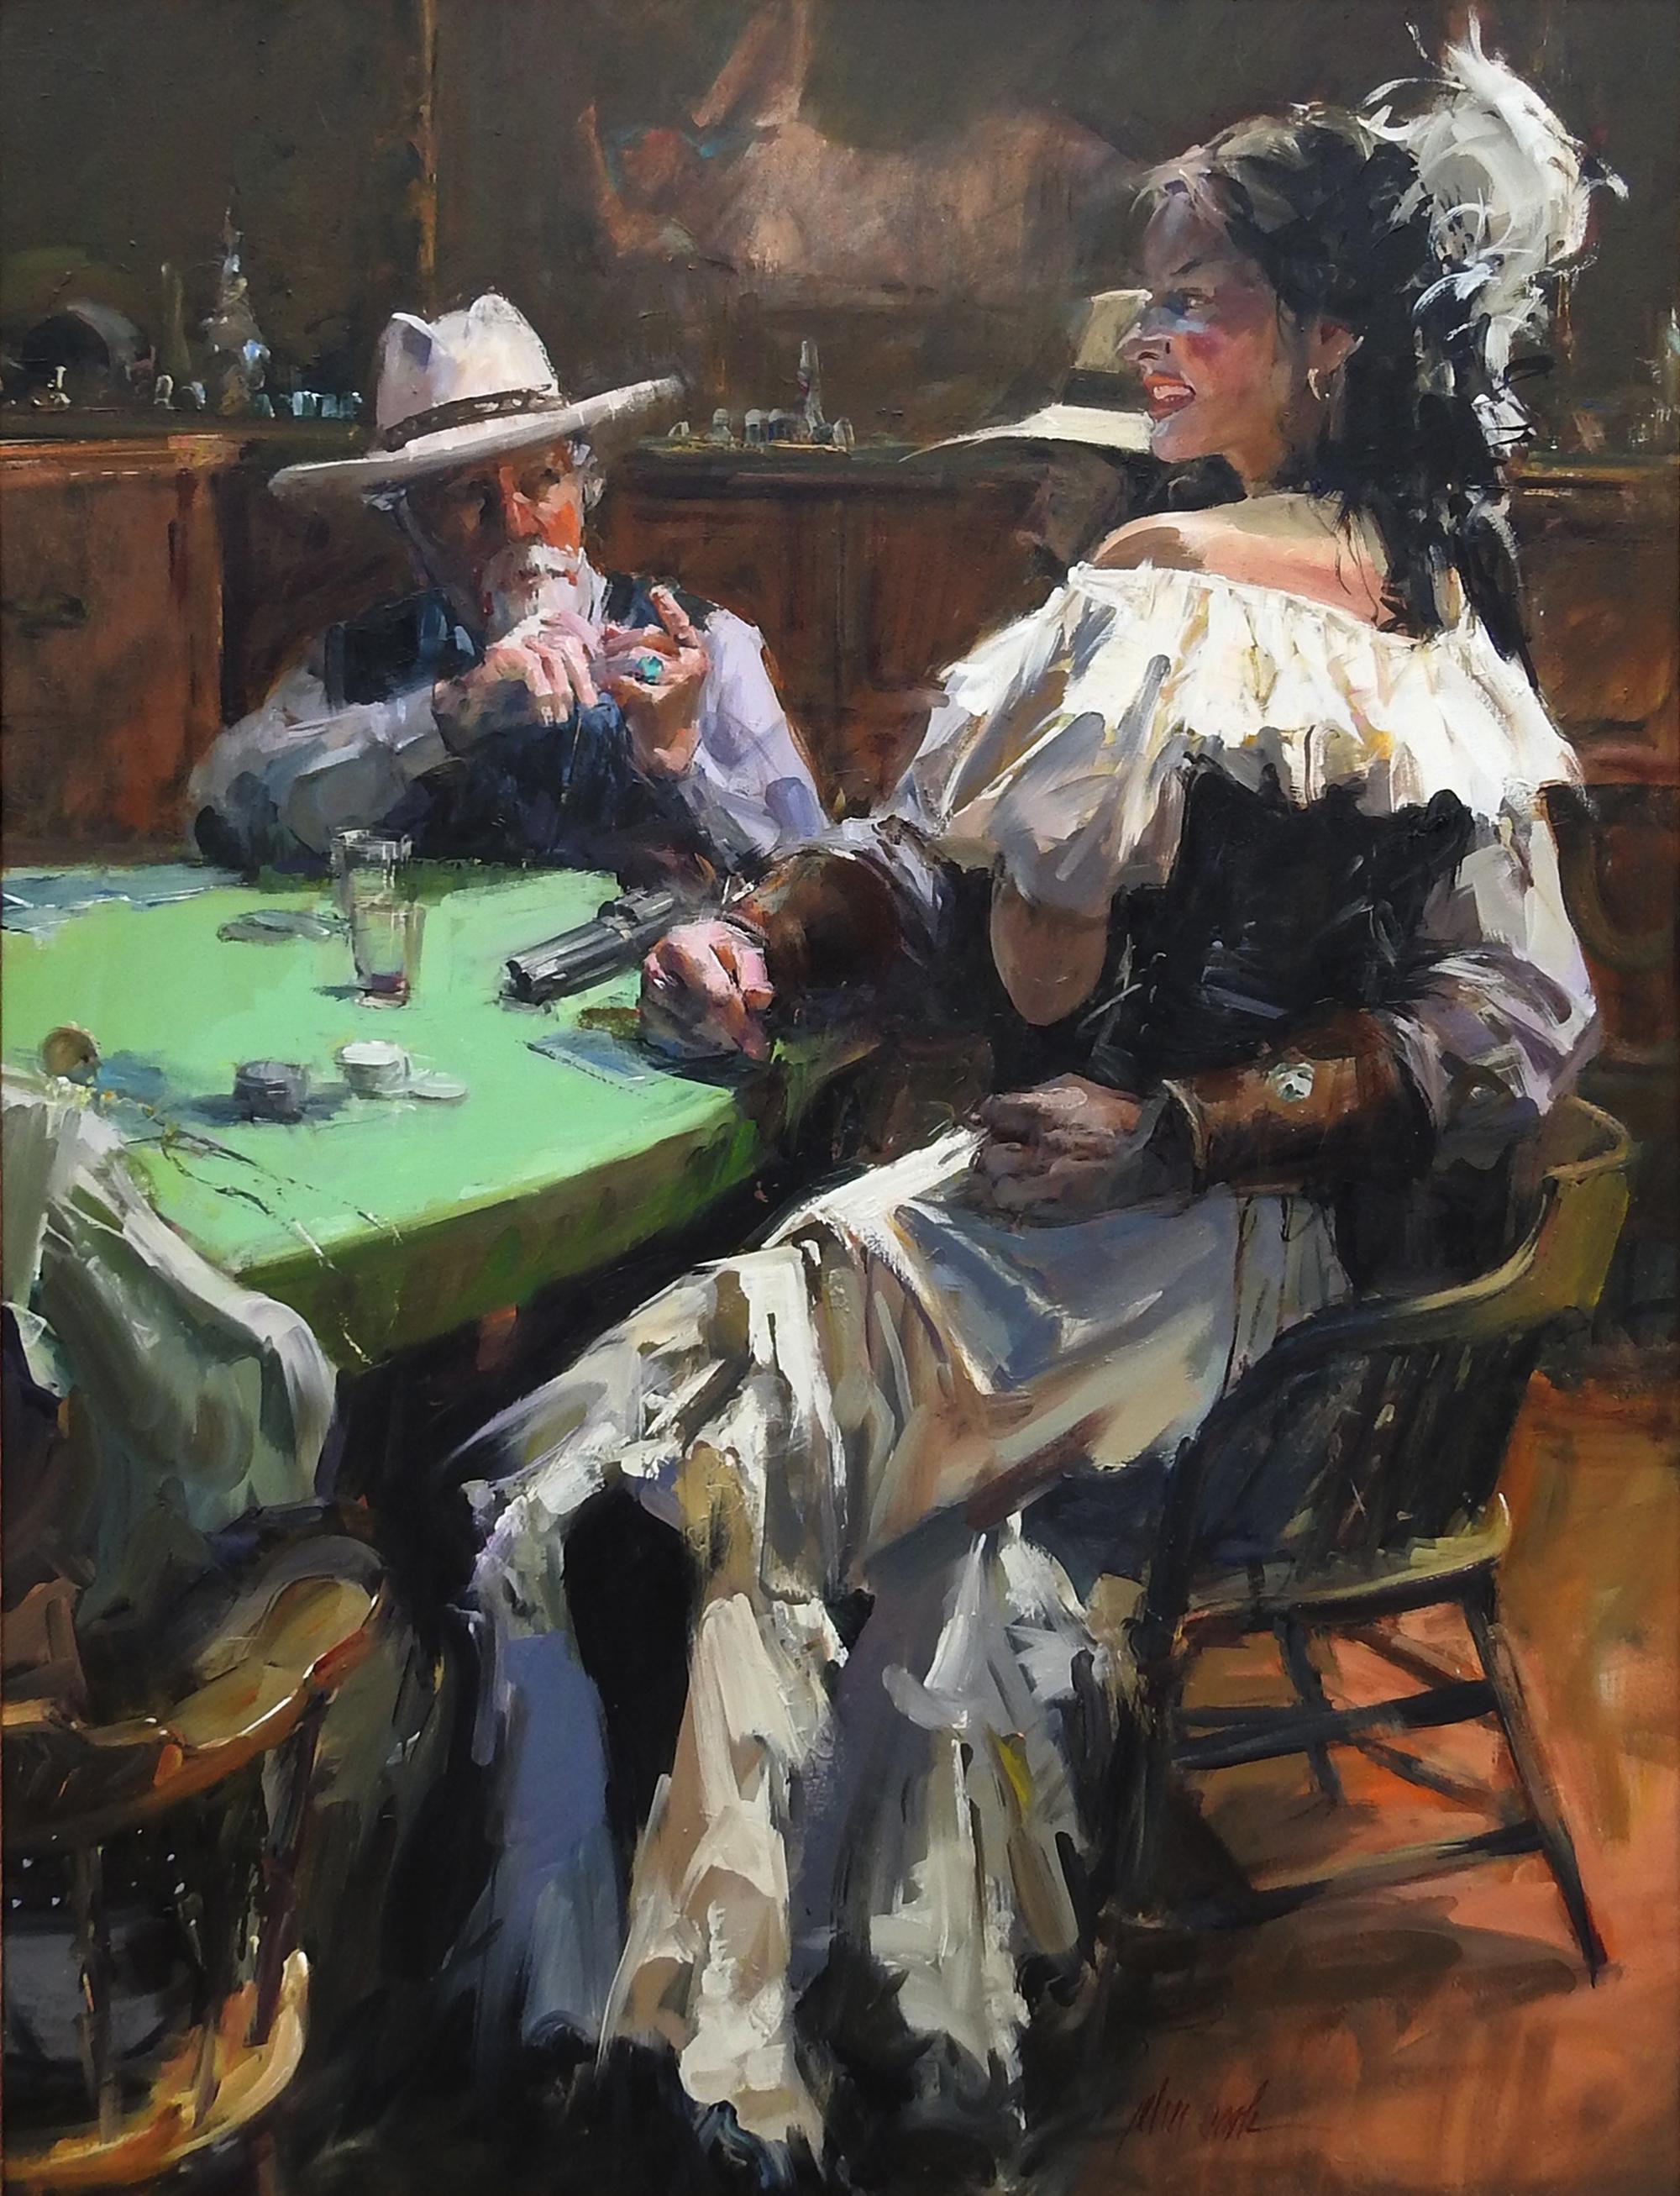 "The Discussion", John Cook, Oil on Canvas, Impressionism, Western, Cowboy